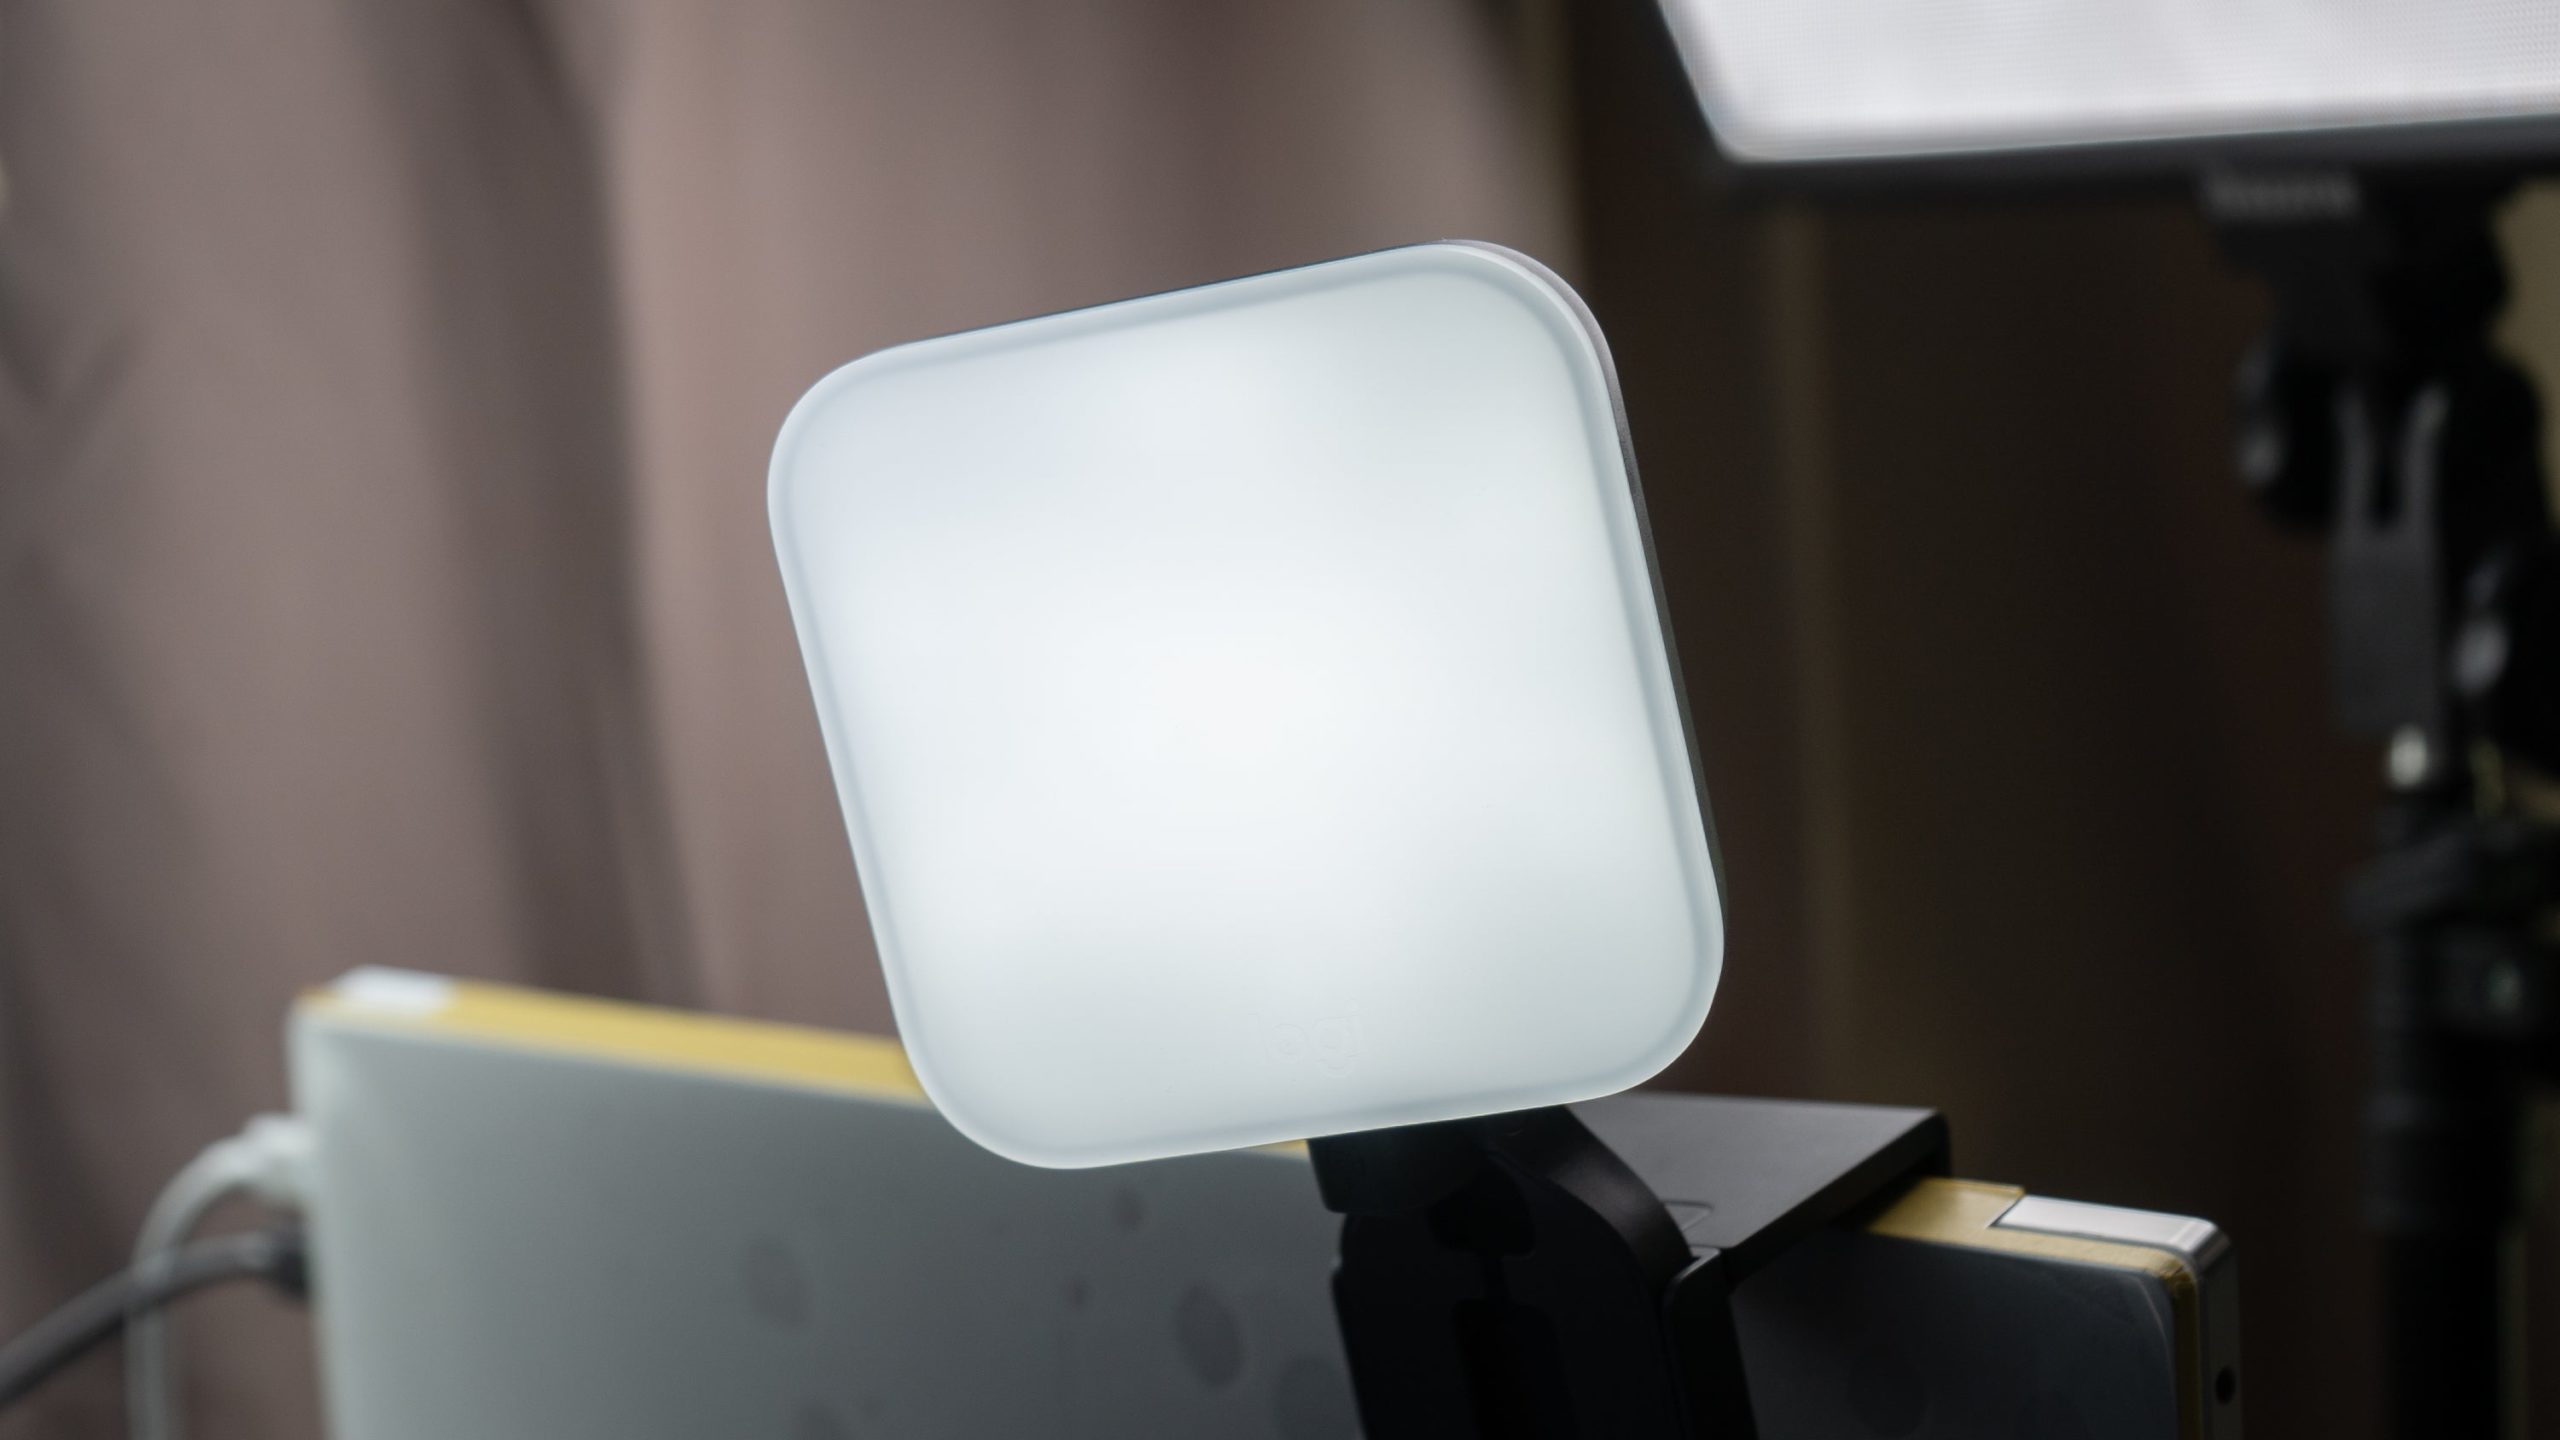 The Litra Glow hangs anywhere, just like Logitech's webcams. (Photo: Florence Ion / Gizmodo)